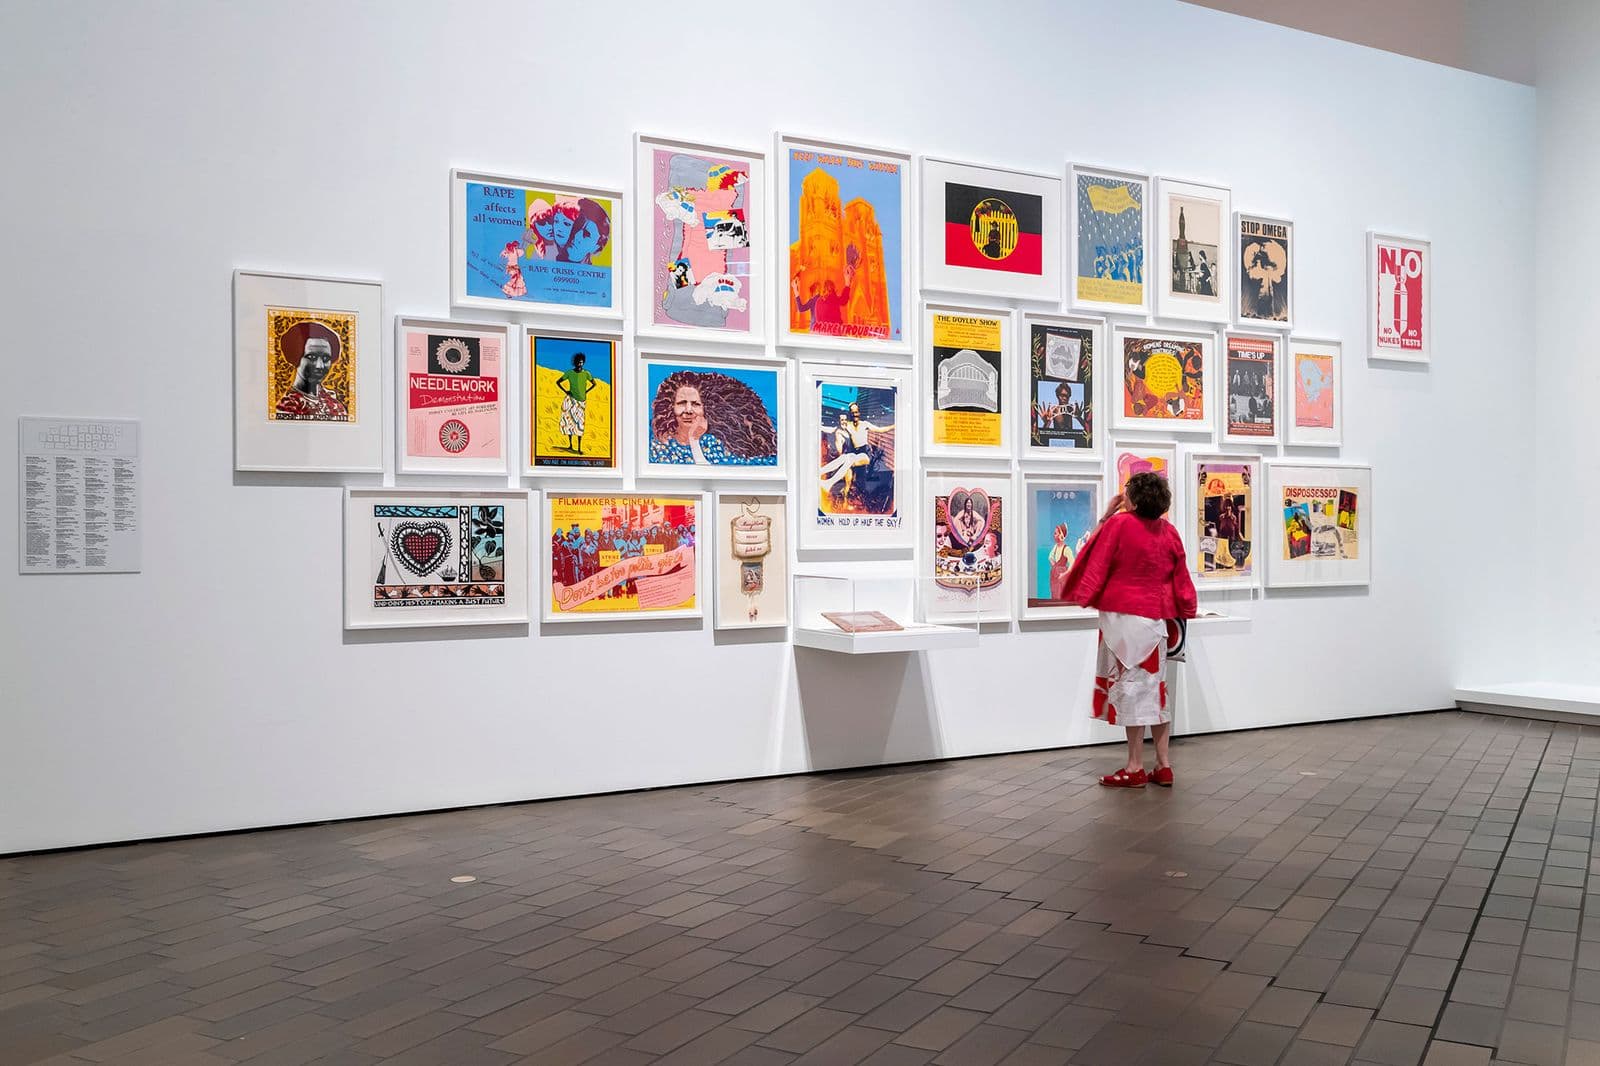 In a large galley space a woman examines a wall of framed and bright posters